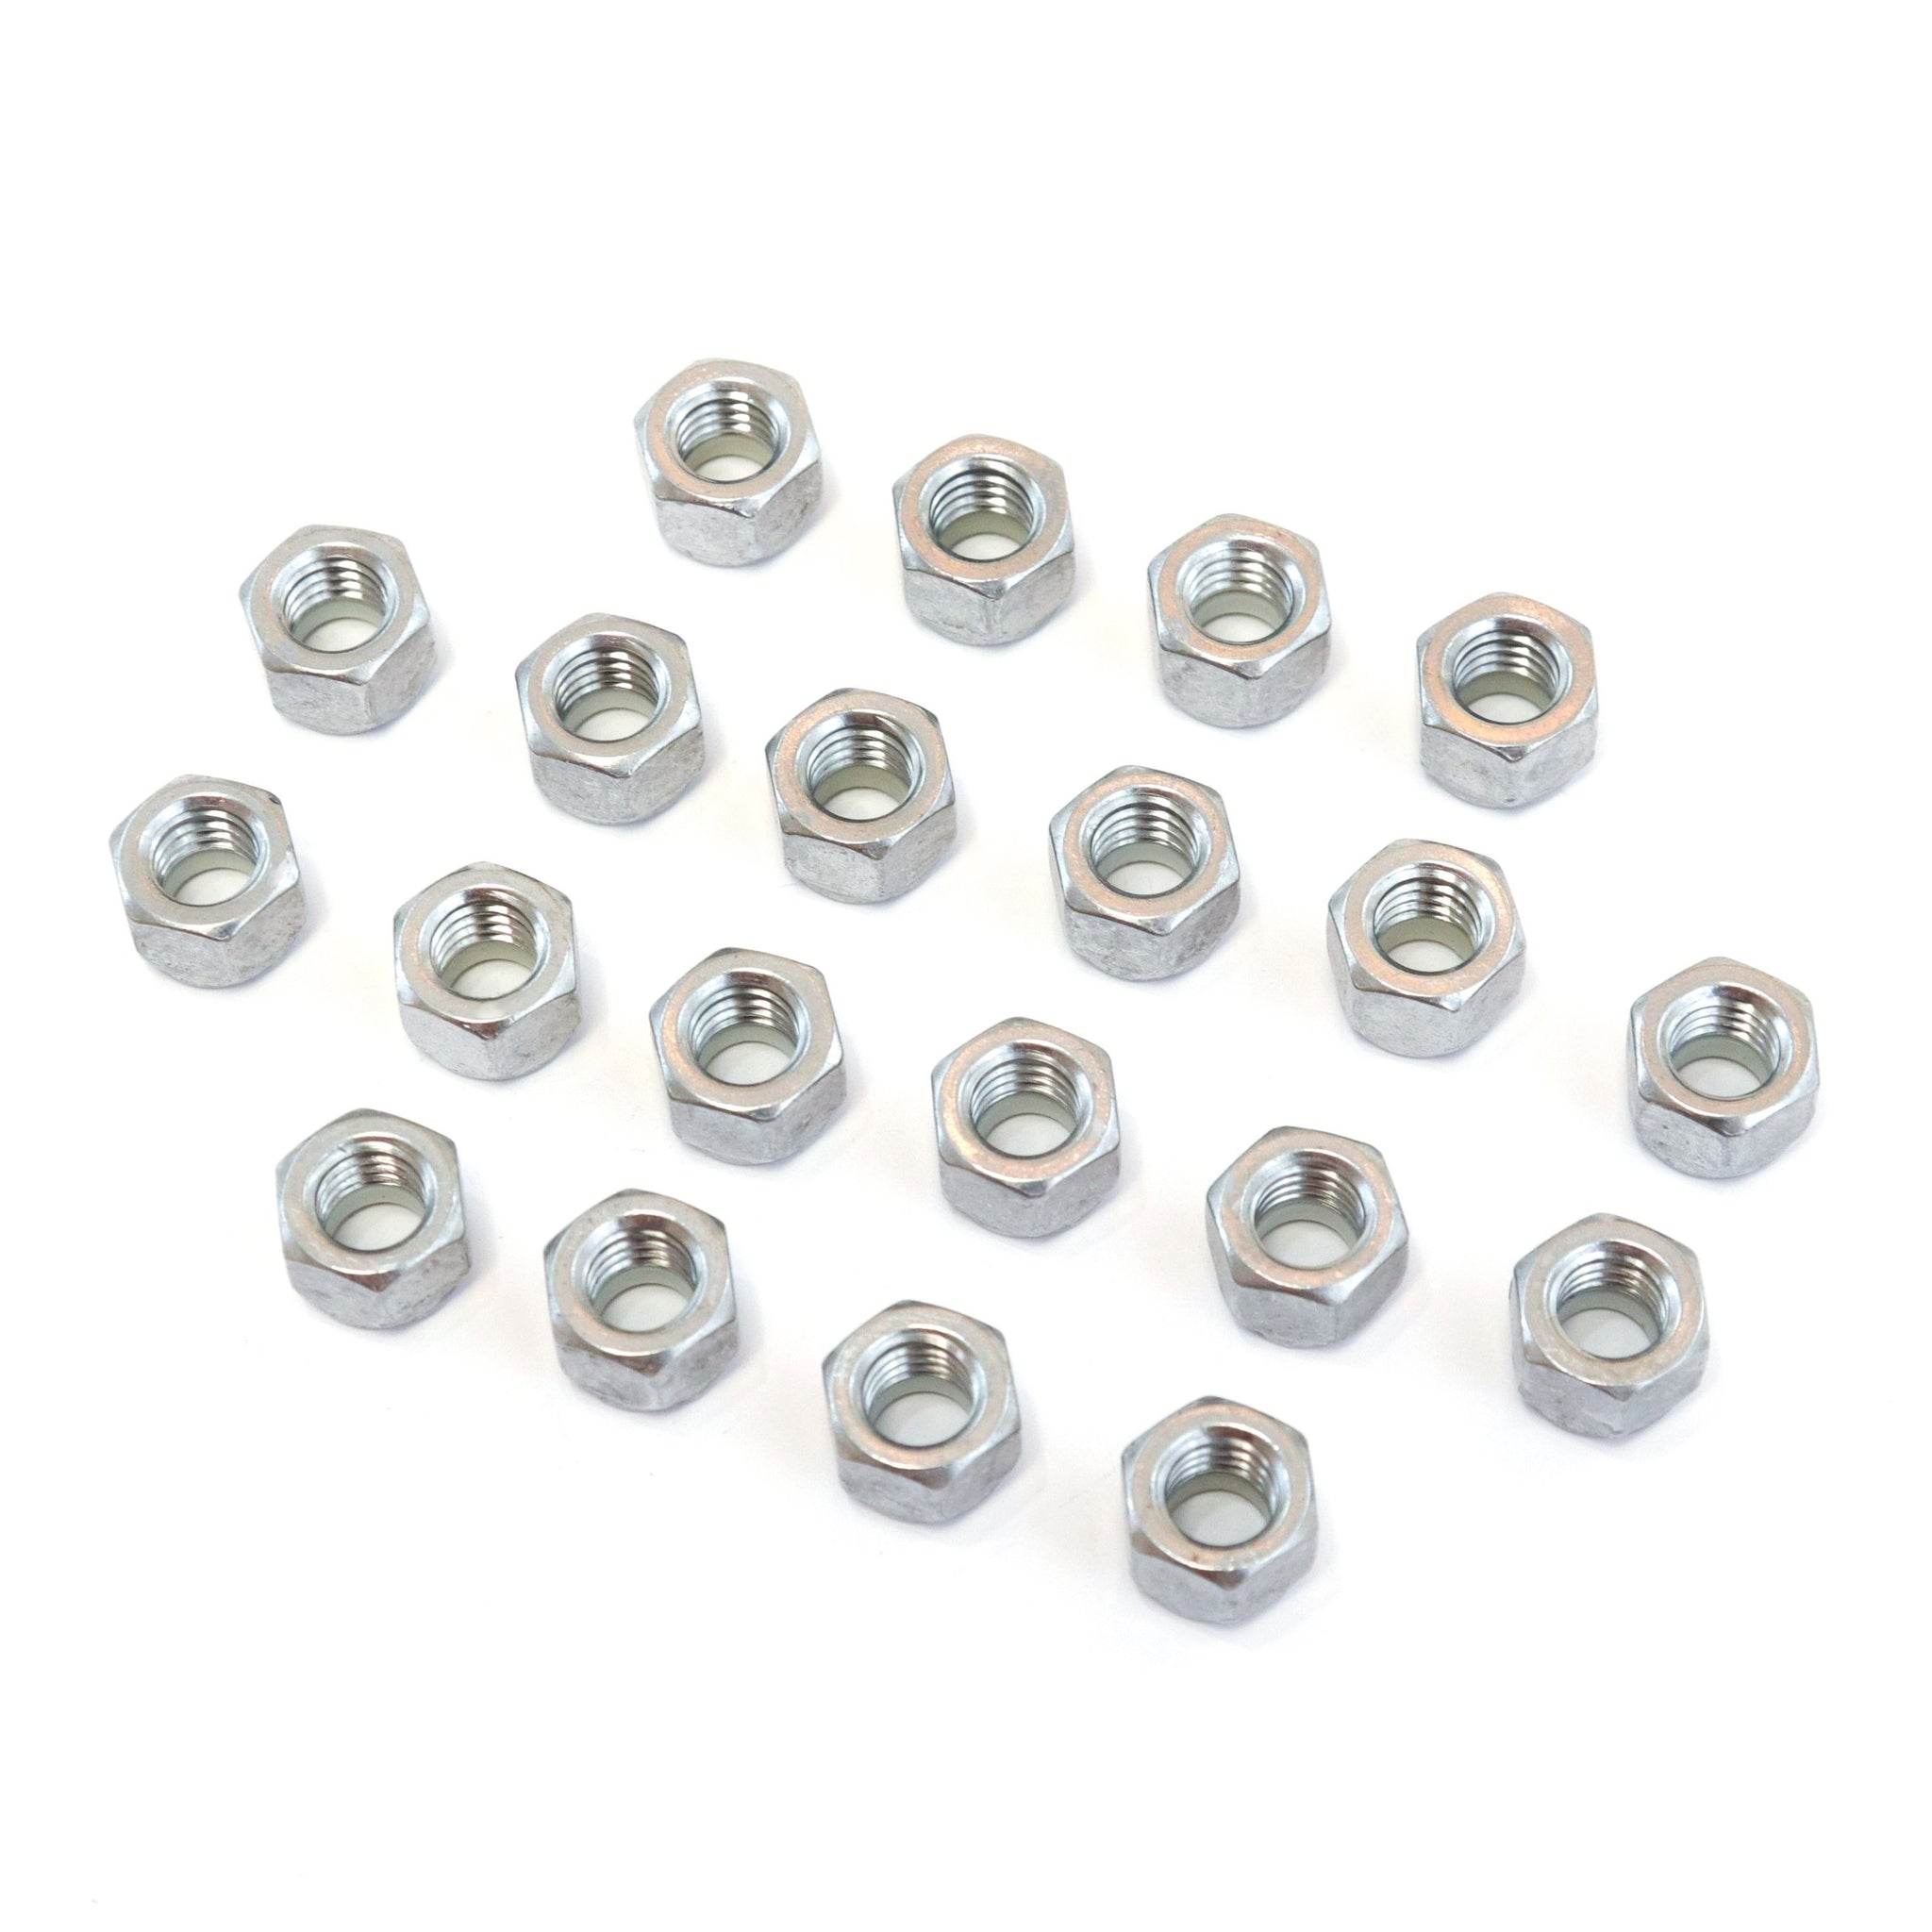 Red Hound Auto 20 Nylon Insert Lock Nut Set 3/8 Inch Diameter Hole Size for Bolt or Threaded Stud 304 SS Stainless Steel Corrosion Resistant 16 Standard Coarse Thread